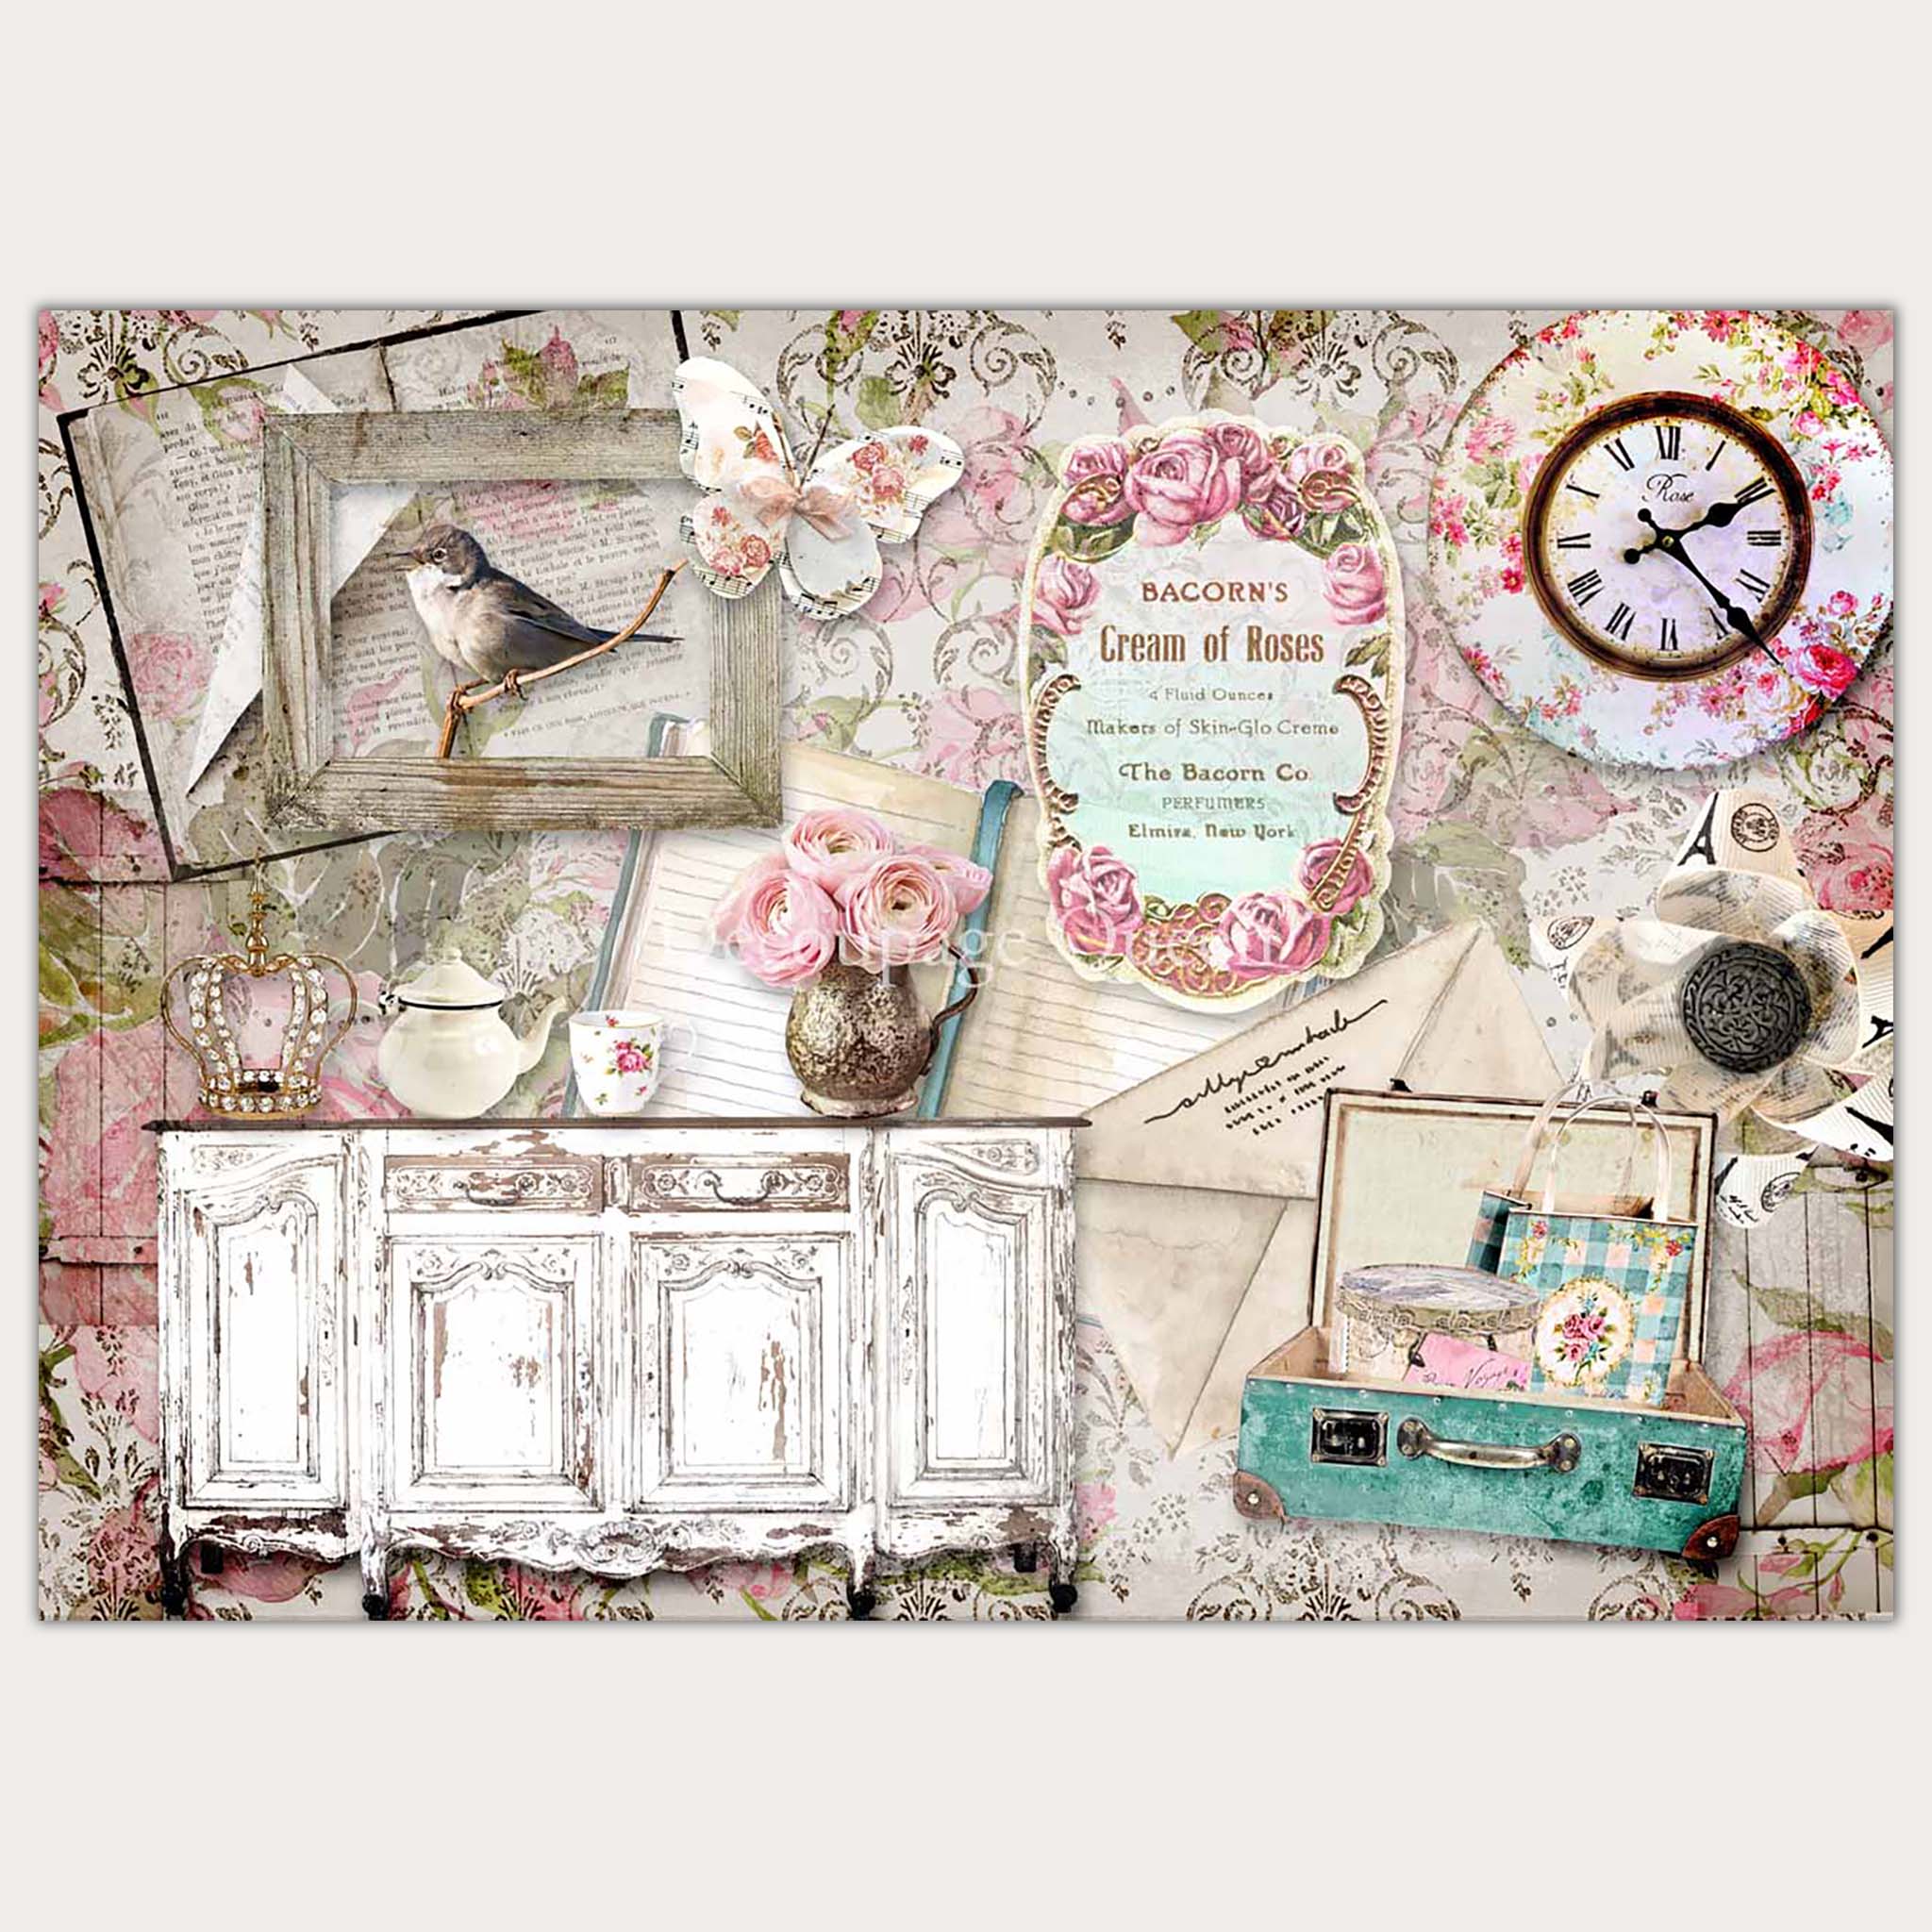 A3 rice paper that features a collage of a vintage buffet table, clock, suitcase, letters, notebooks, and a bird in a wood frame are against a light floral background. White borders are on the top and bottom.